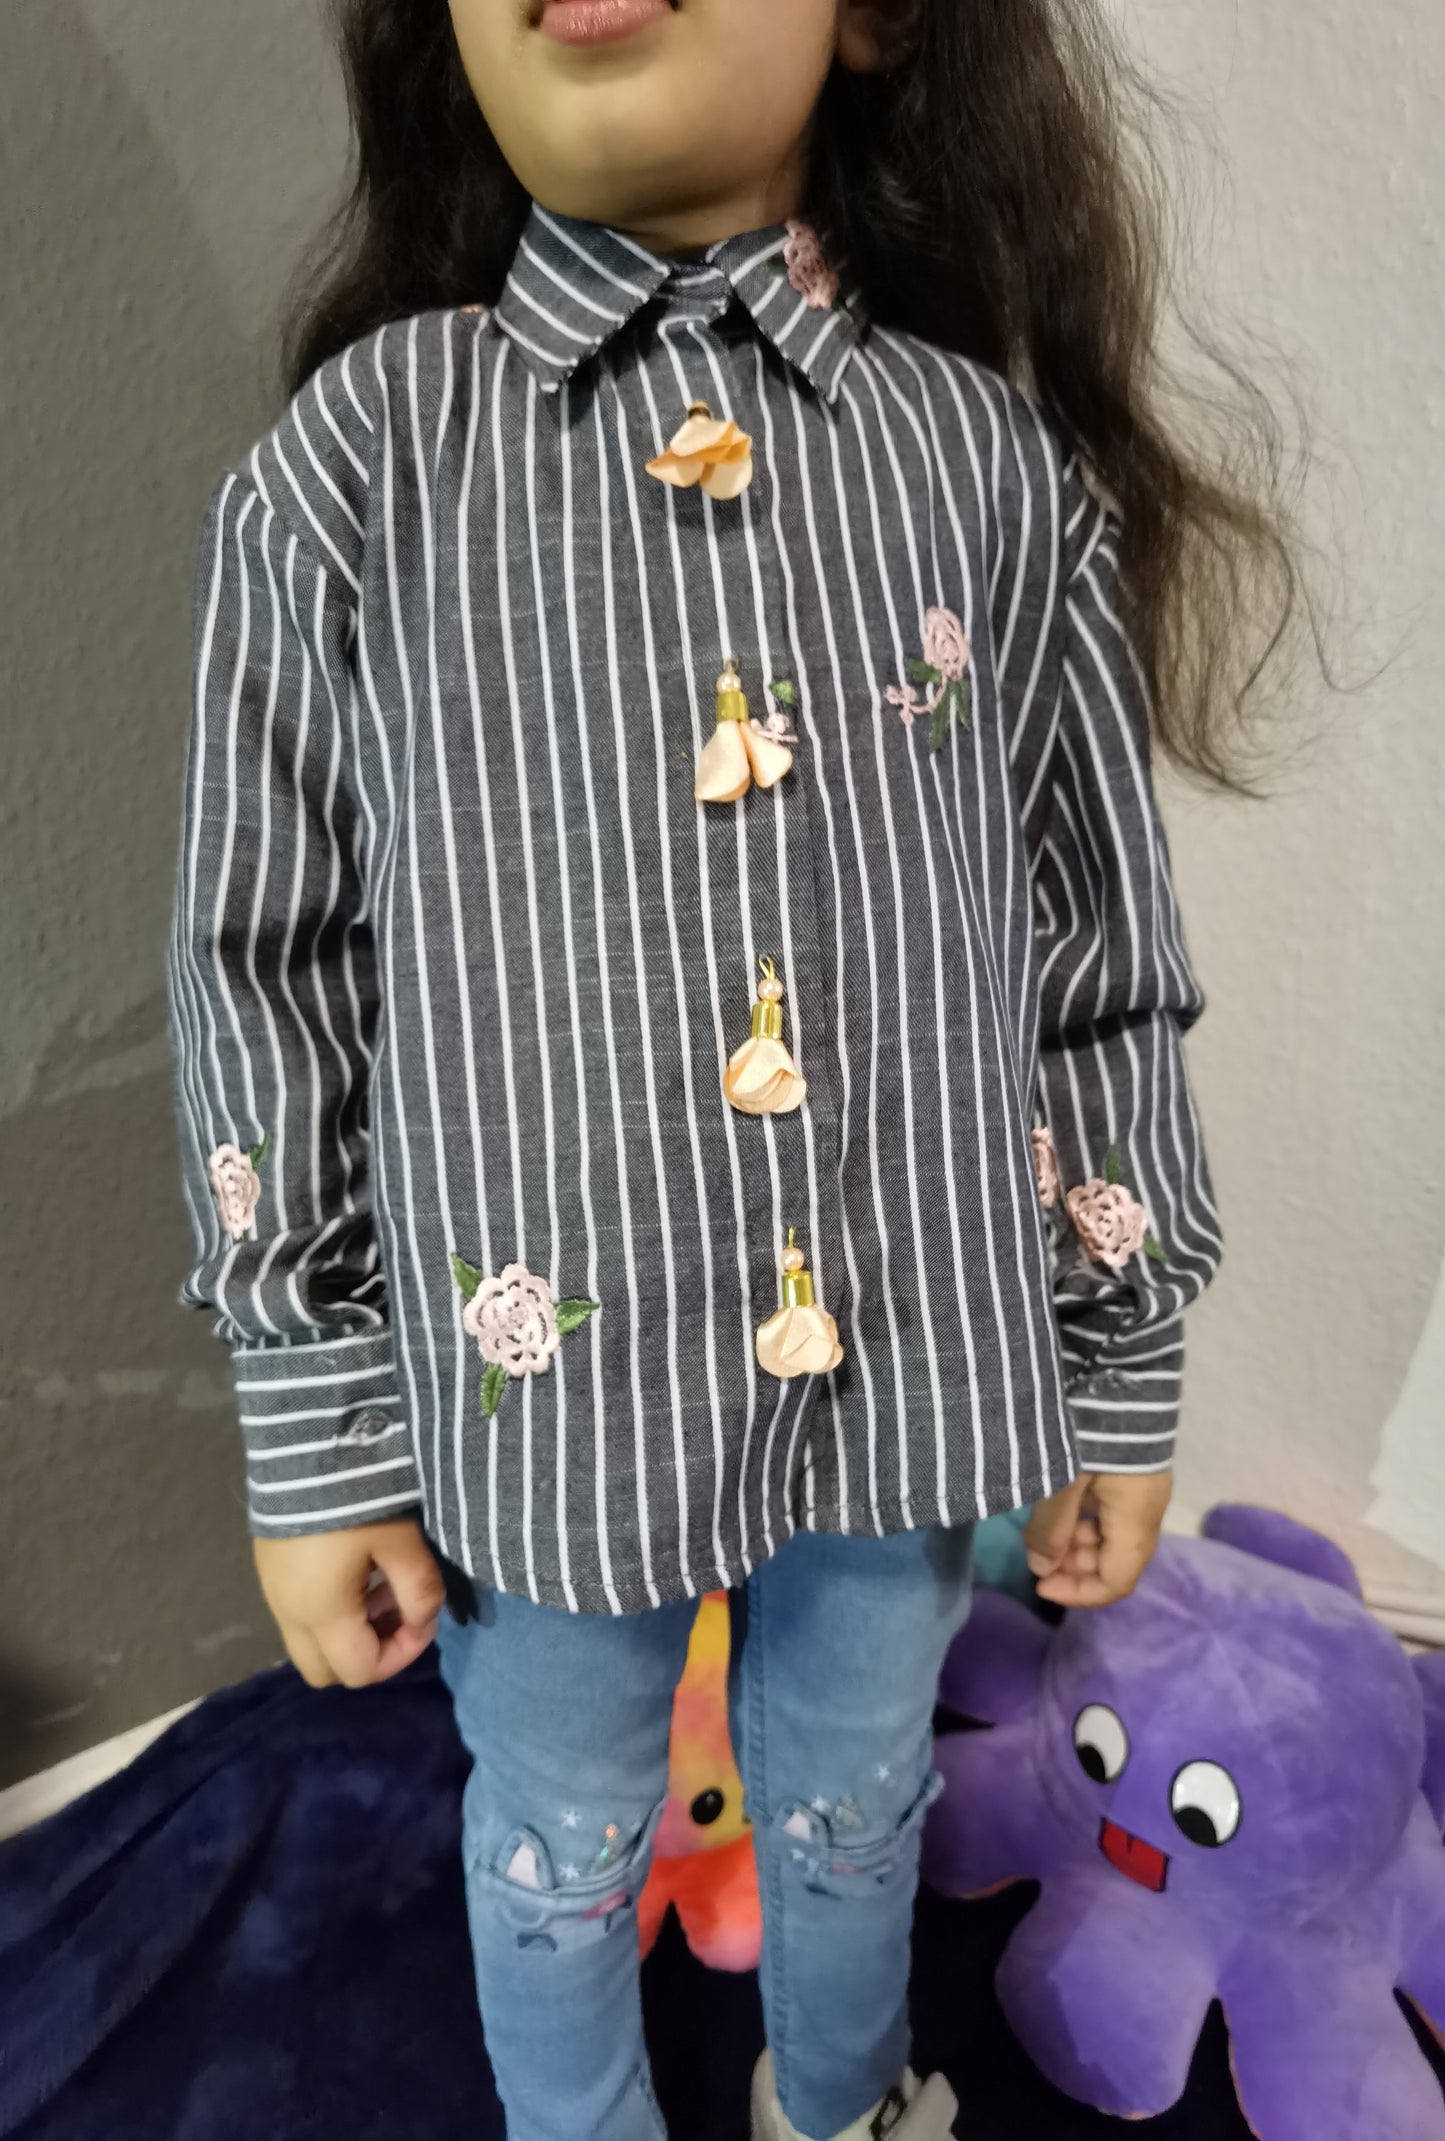 Grey striped shirt with embroidery flower details